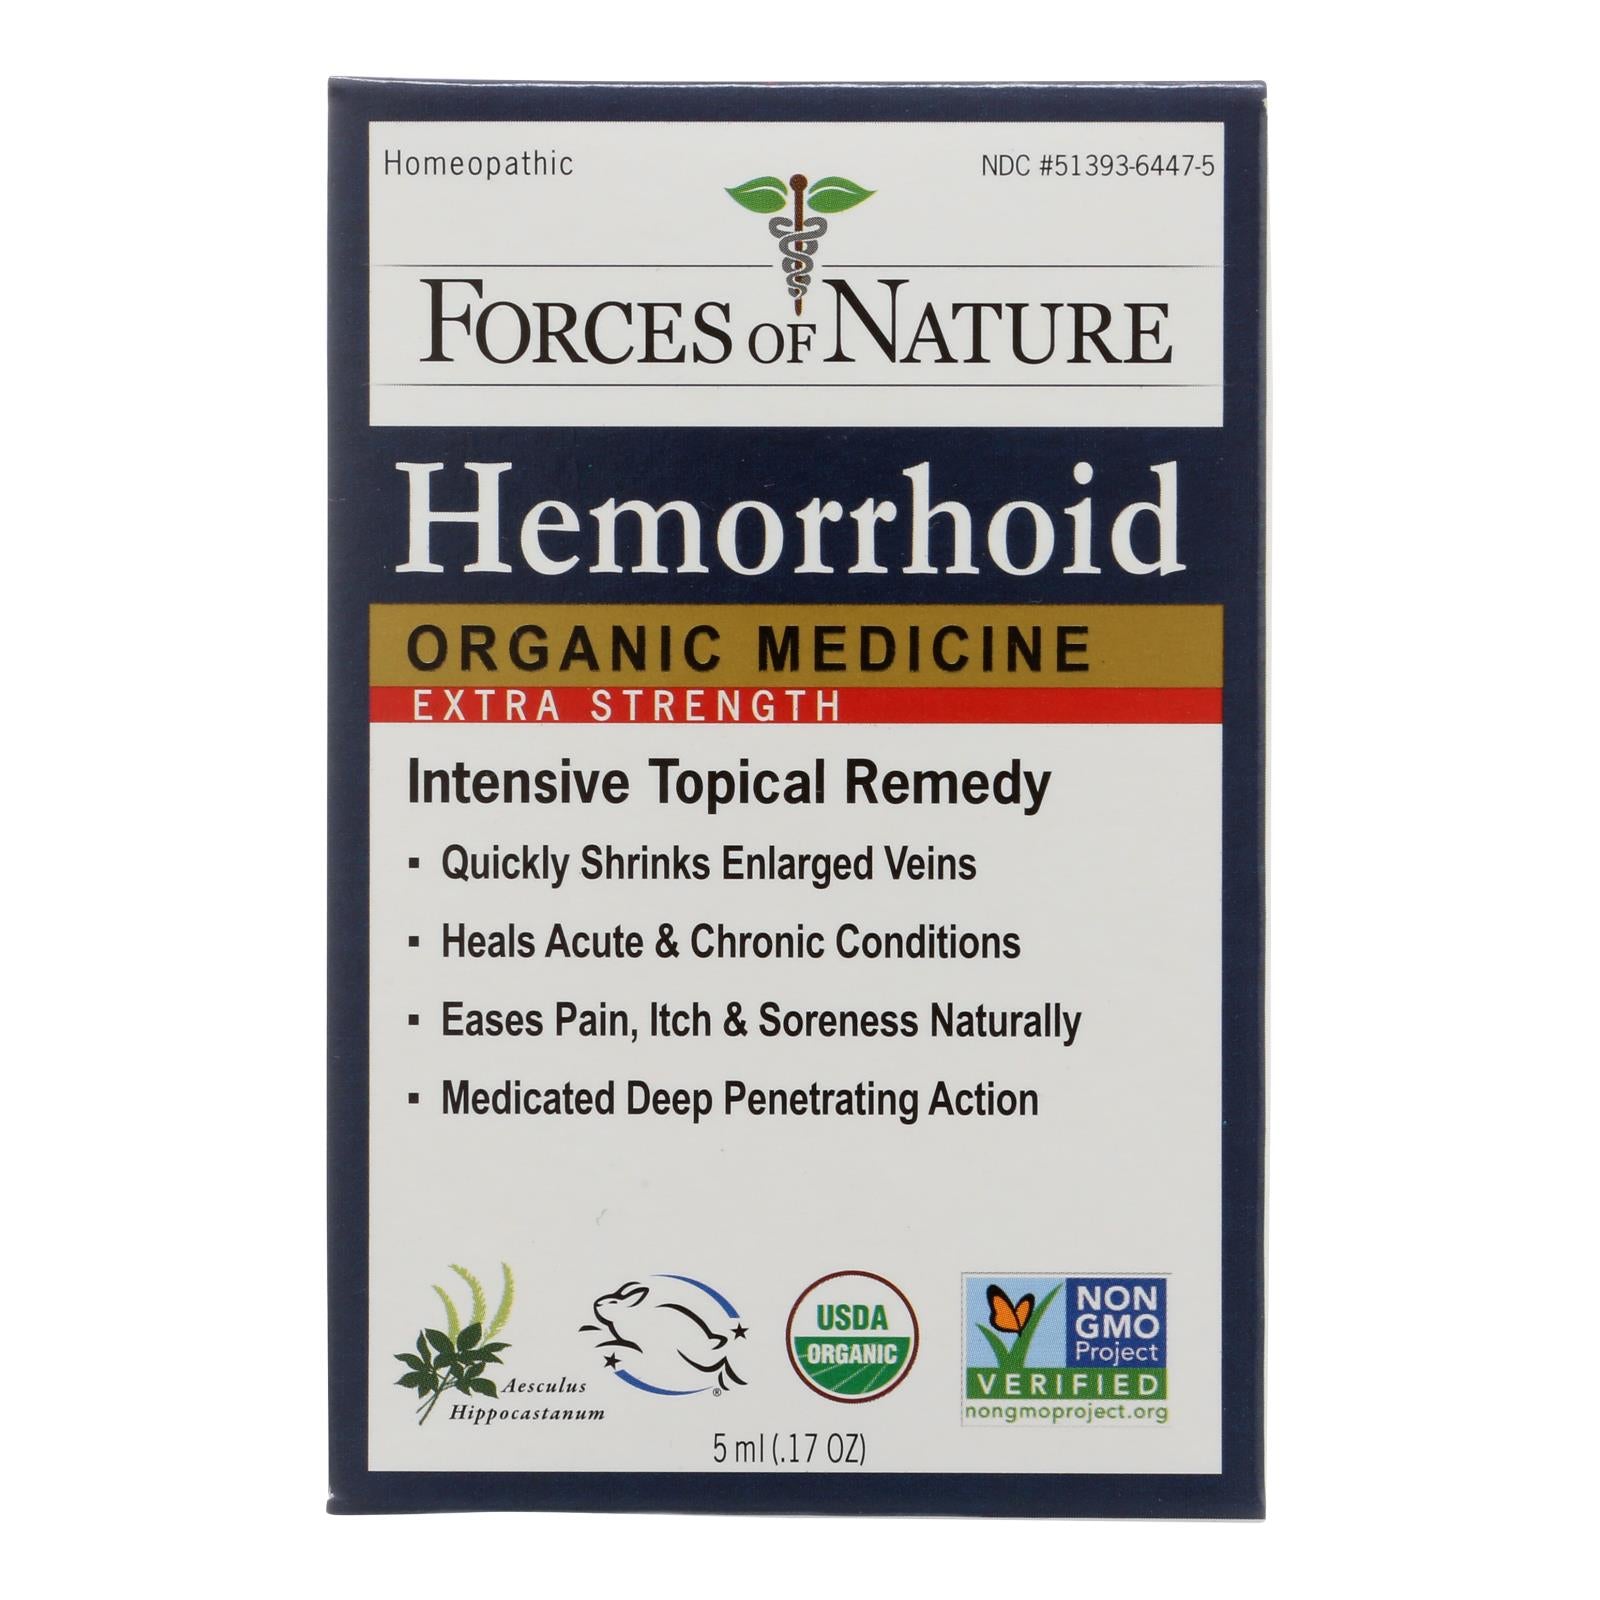 Forces of nature hemorrhoid control extra strength certified organic medicine contains witch hazel and horse chestnut, which provide relief from chronic and acute hemorrhoids by activating the system that shrinks swollen blood vessels, unravels any twisted veins and strengthens your circulatory tract. Our hemorrhoid co